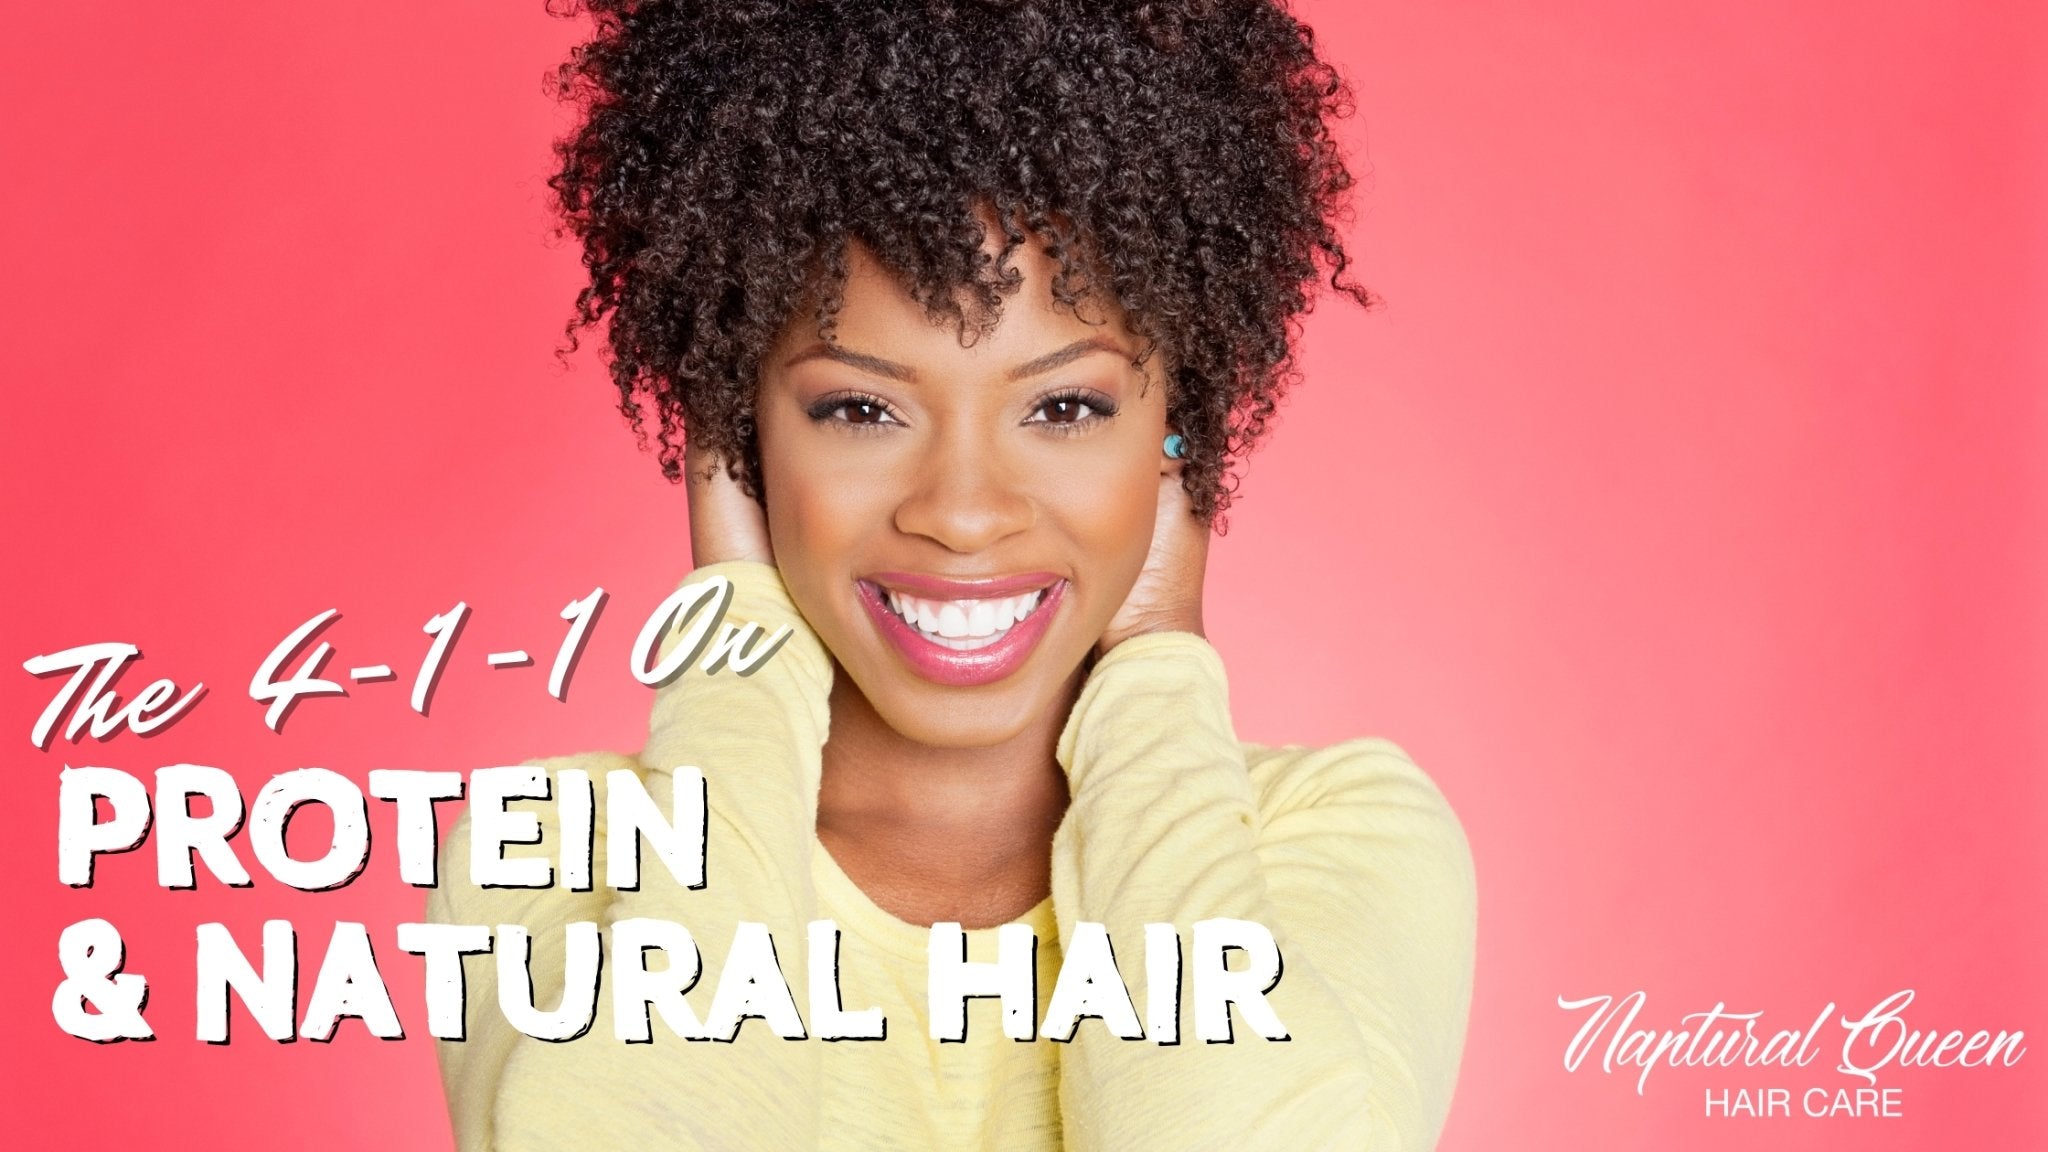 The 4-1-1 On Protein and Natural Hair - Naptural Queen Hair Care